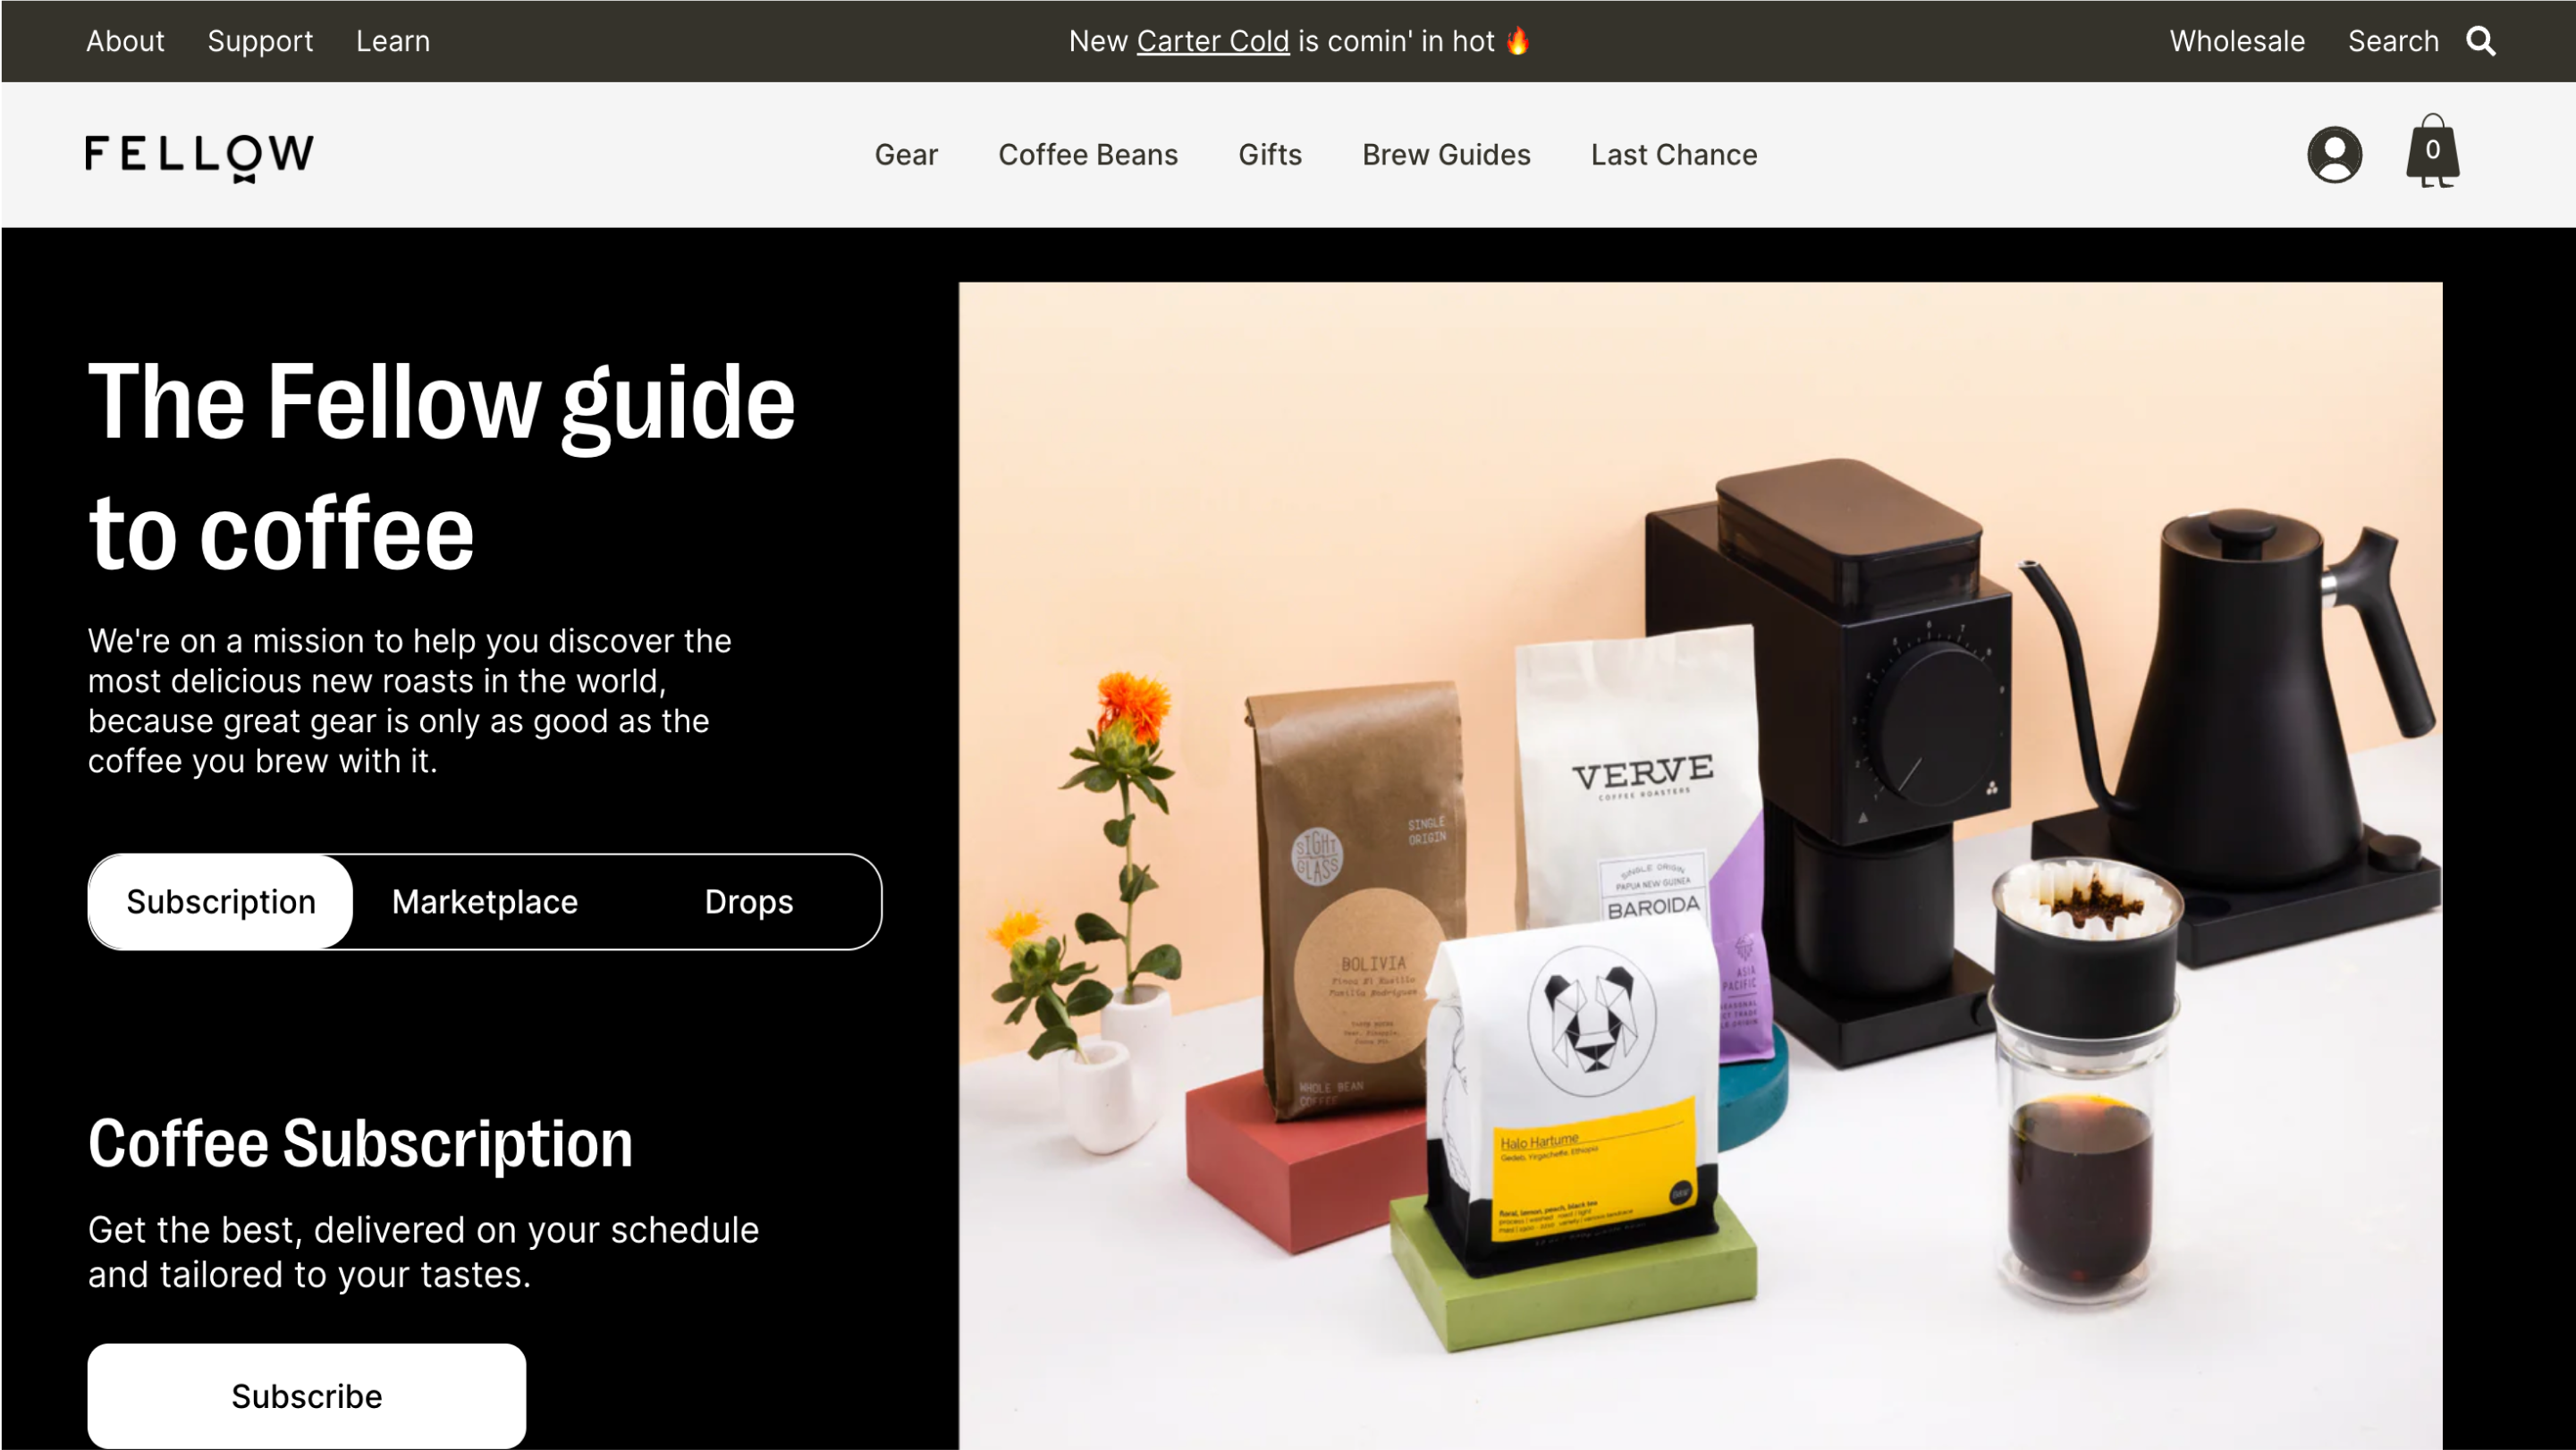 Desktop screenshot from Fellow's site showing the coffee subscription feature